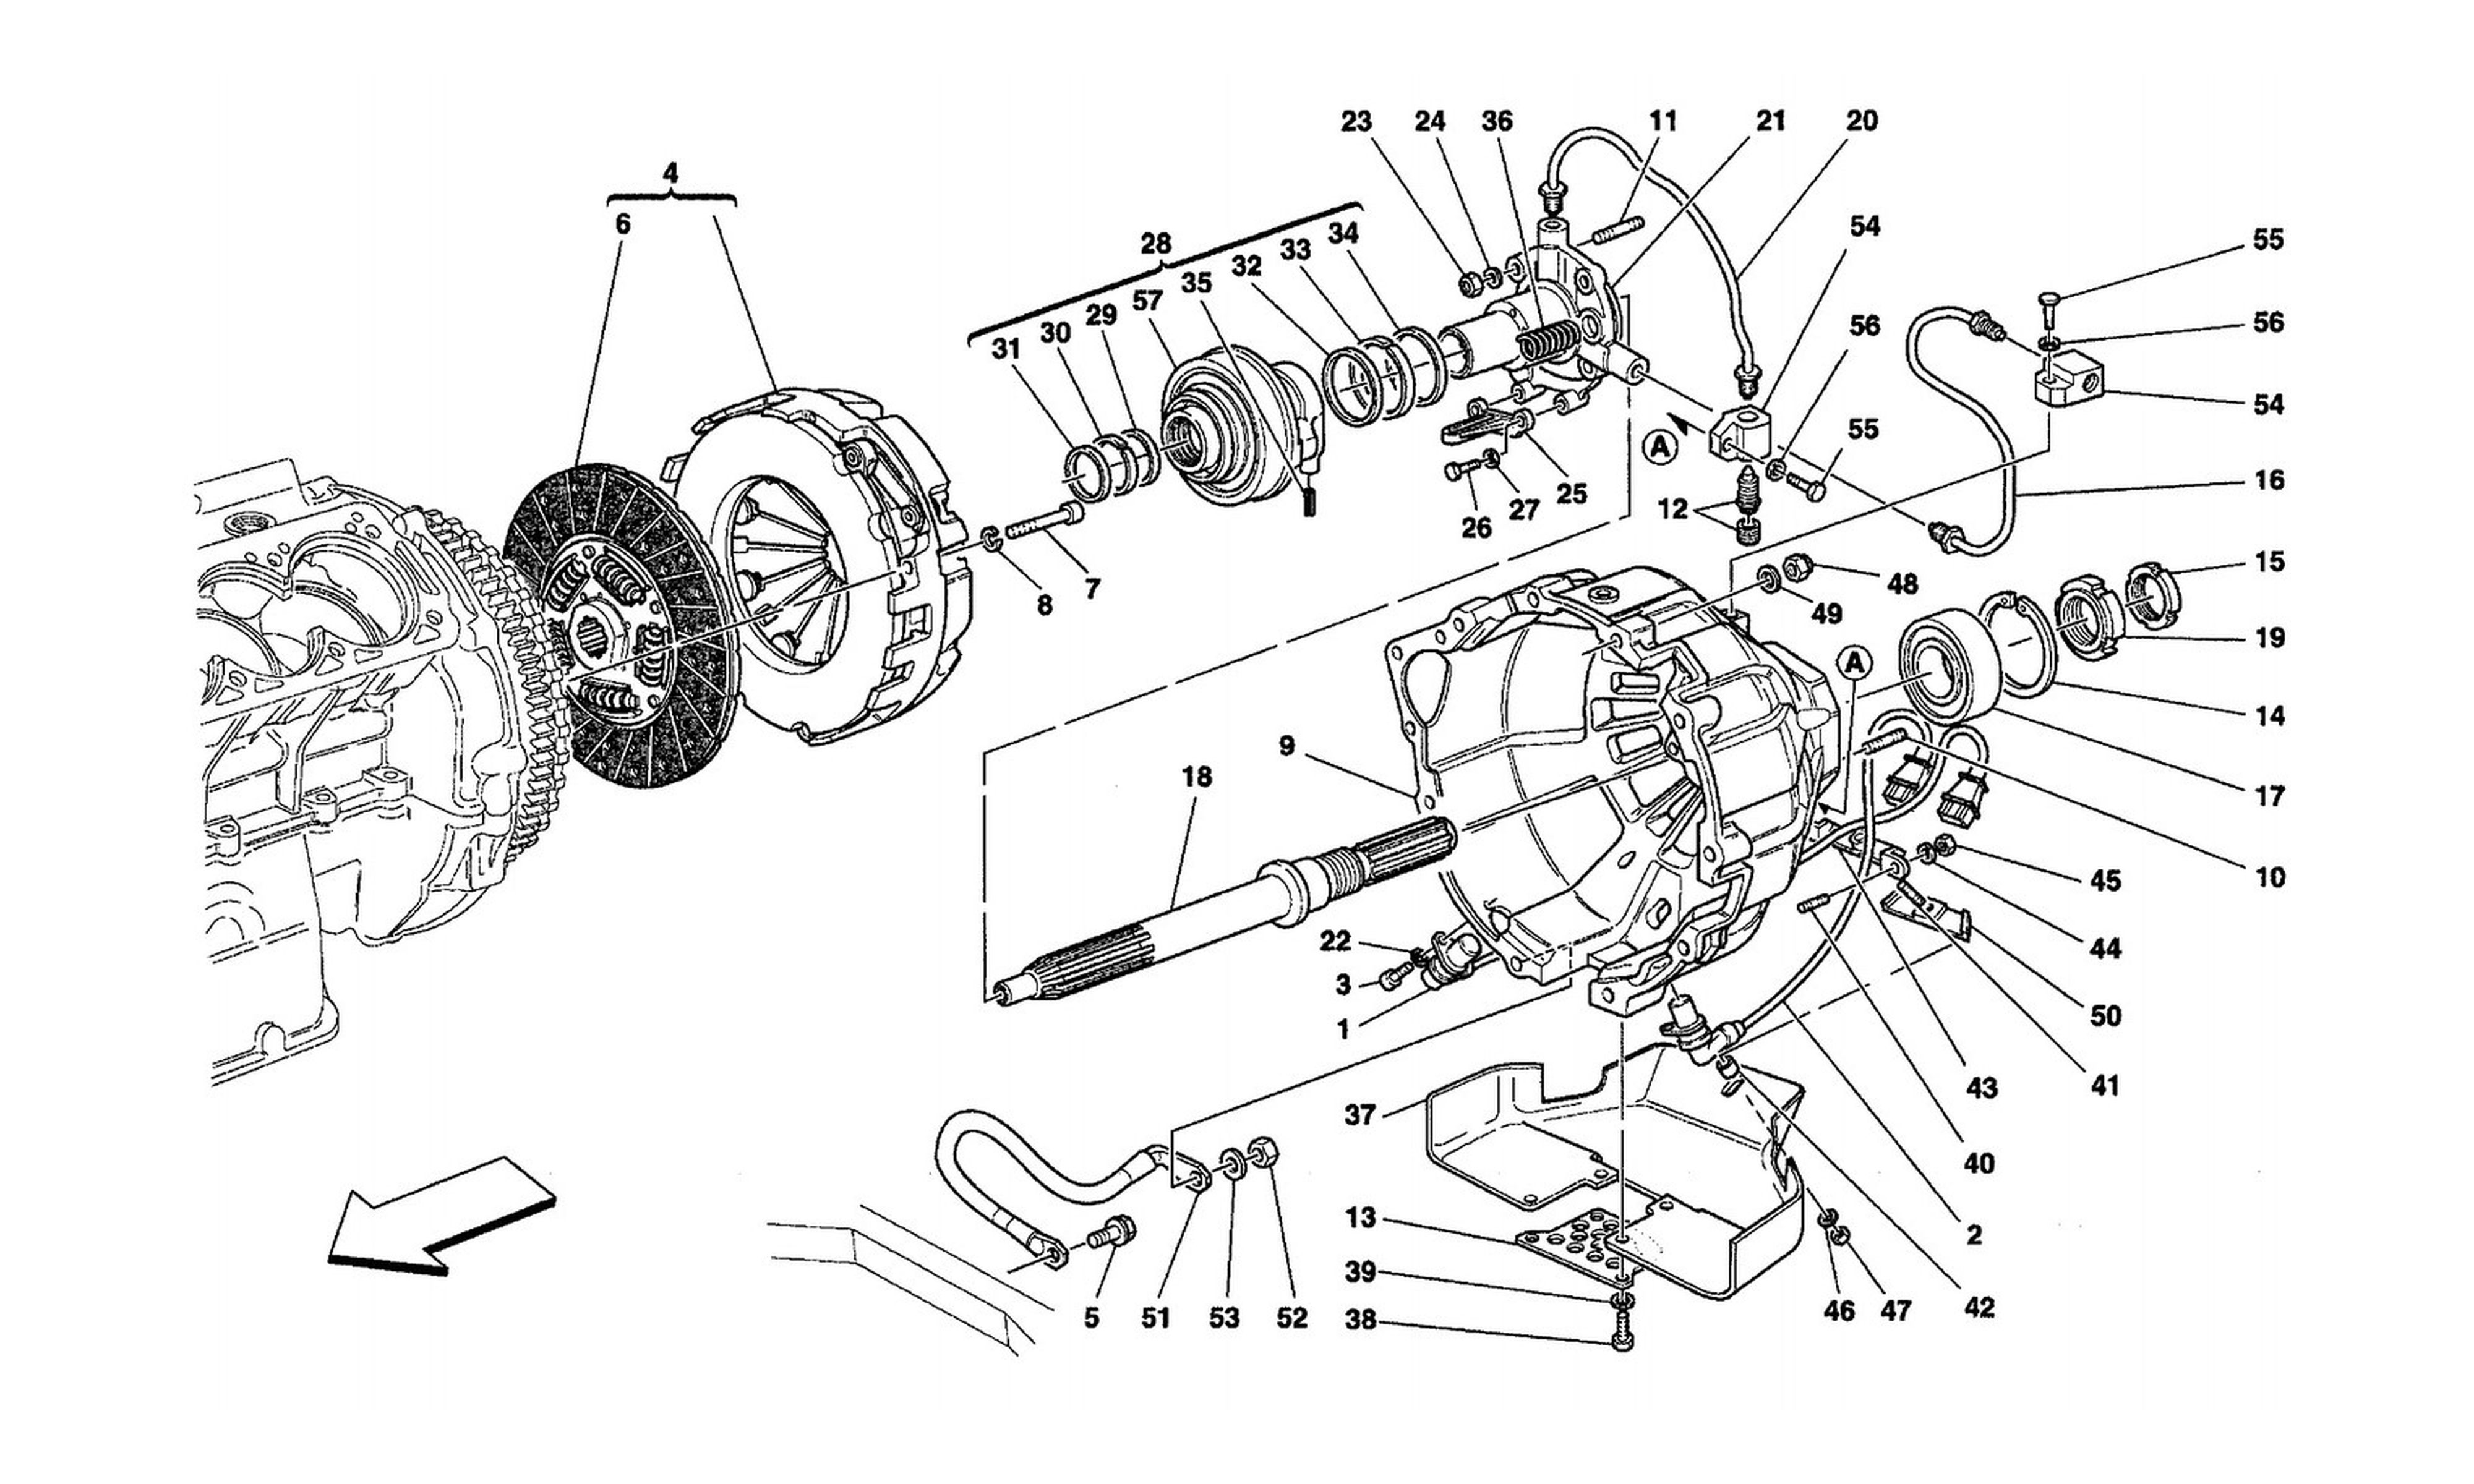 Schematic: Clutch And Controls -Not For F1-